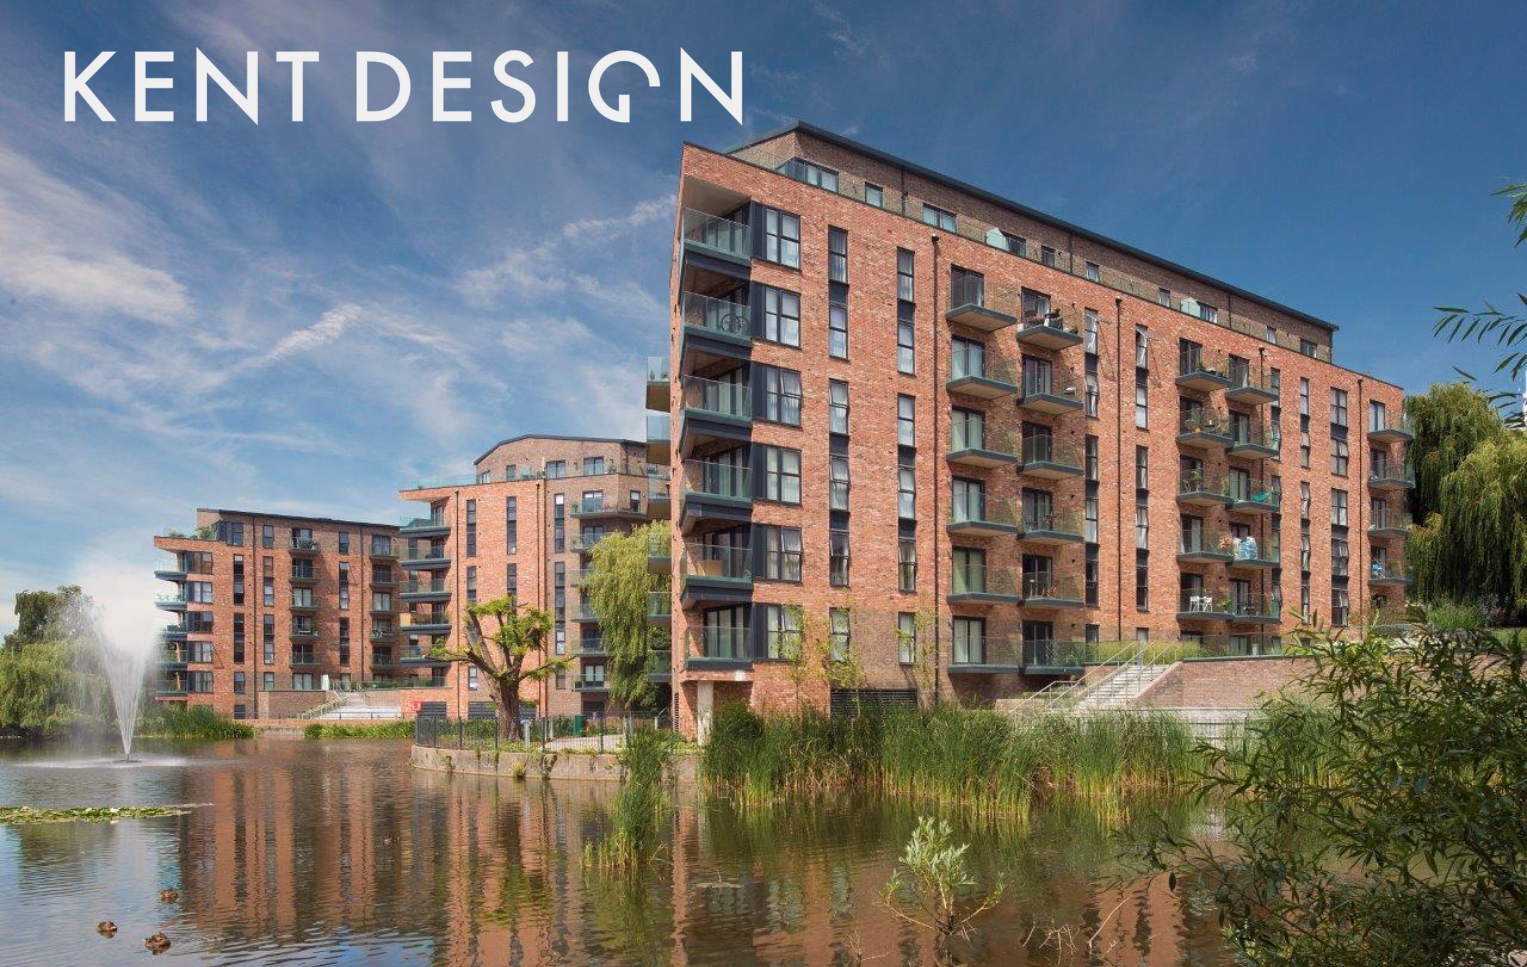 Design South East — Kent Design Knowledge Exchange: North and West Kent Developments Showcase